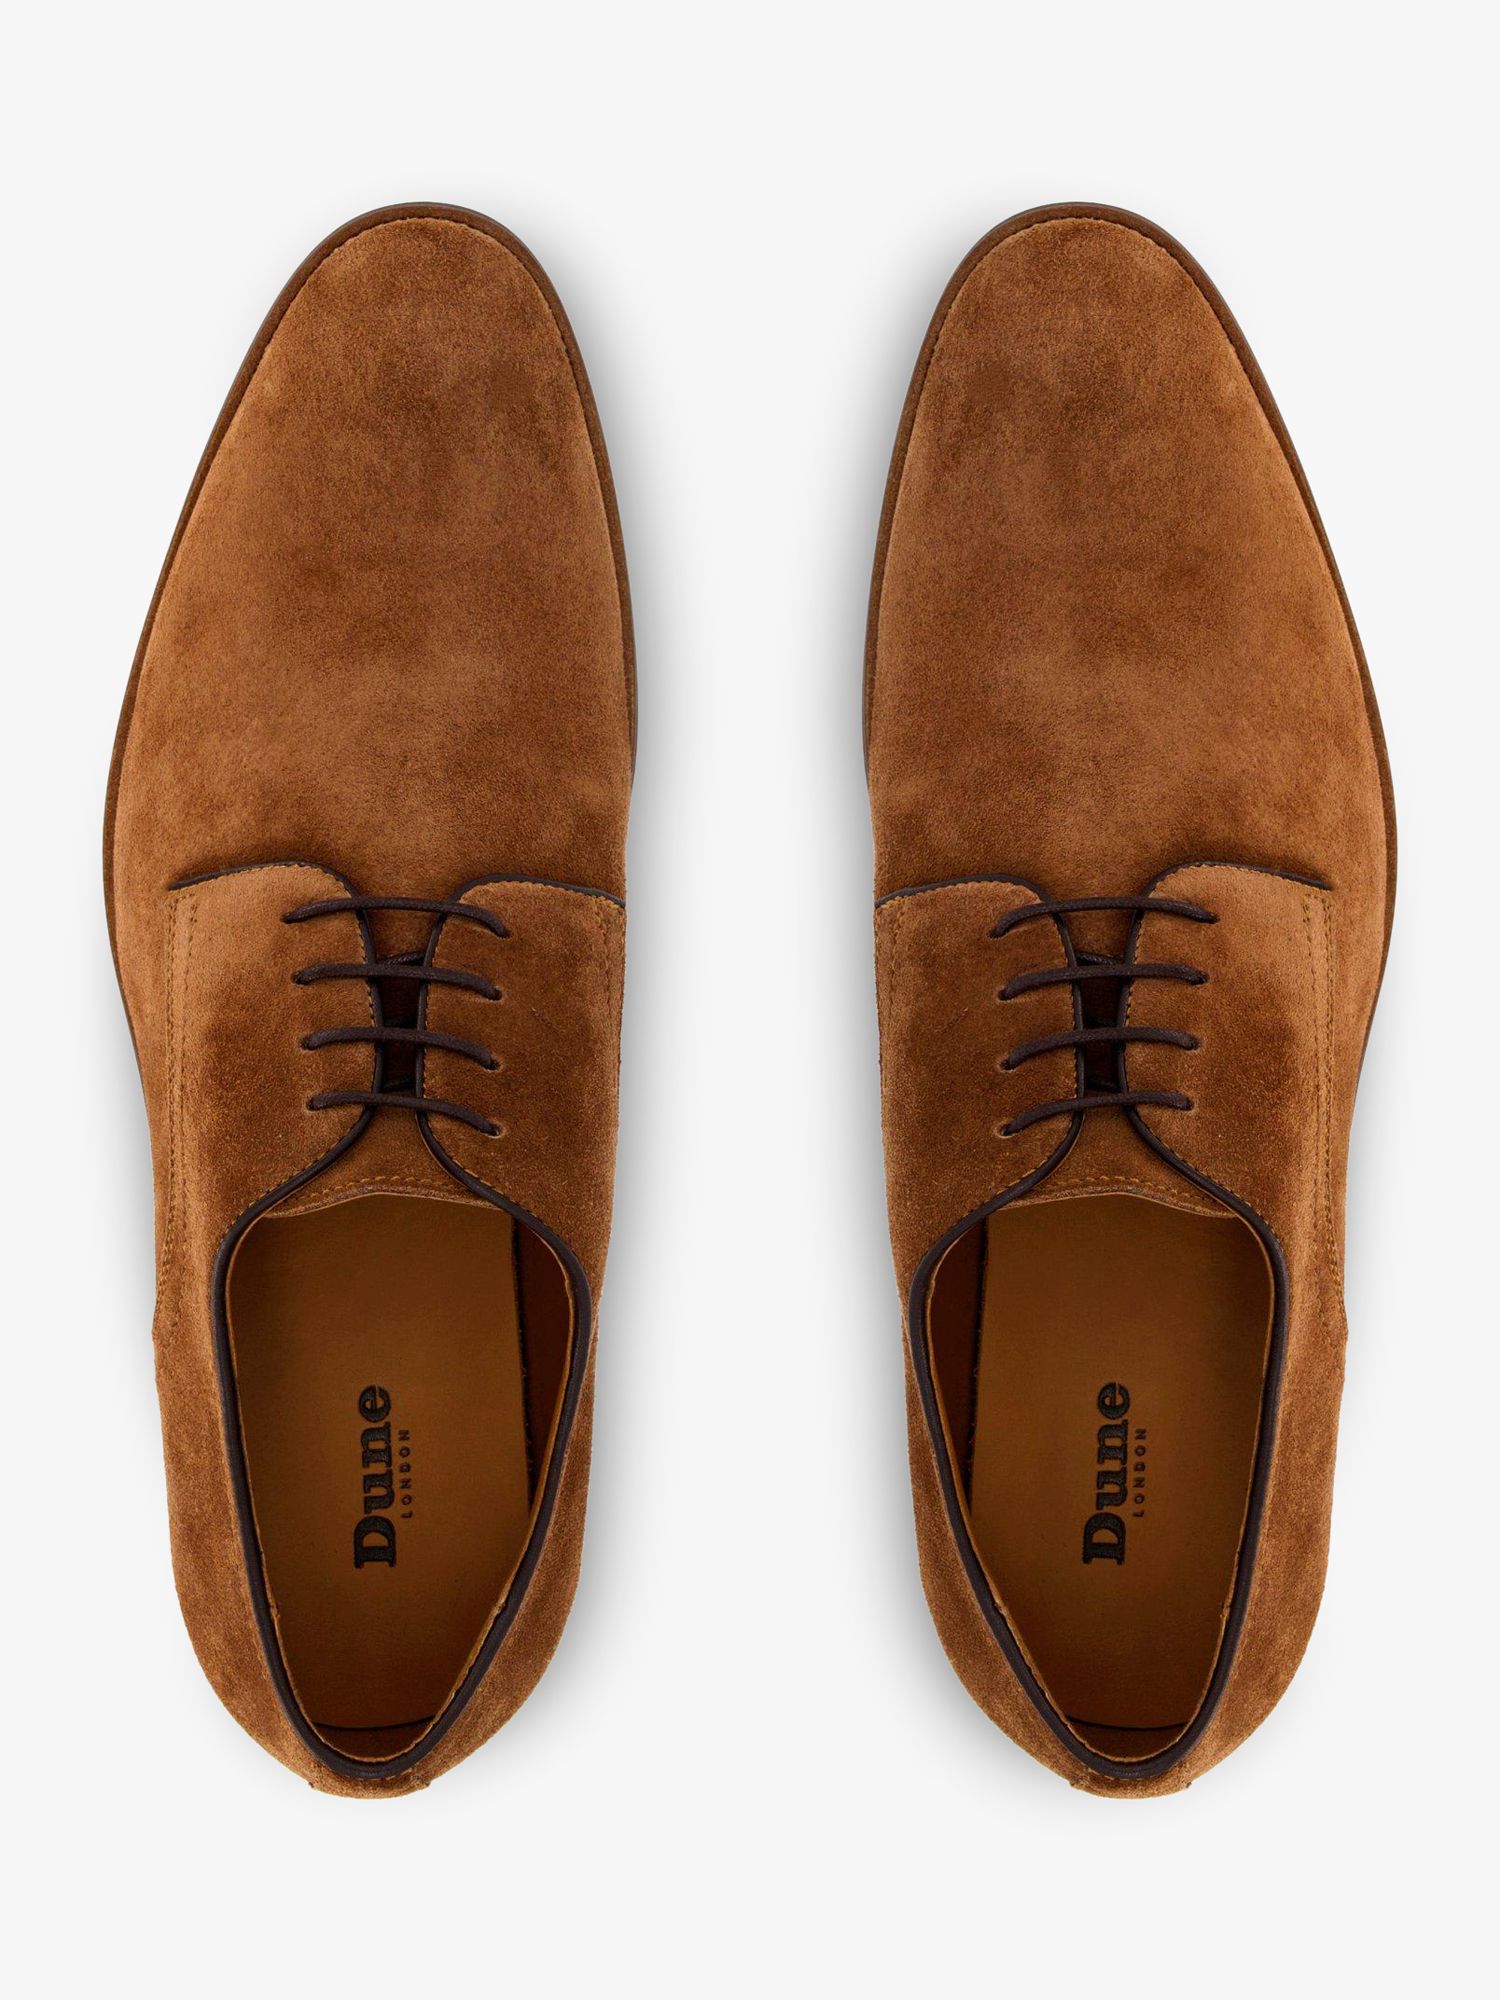 Dune Bonnzer Suede Gibson Shoes